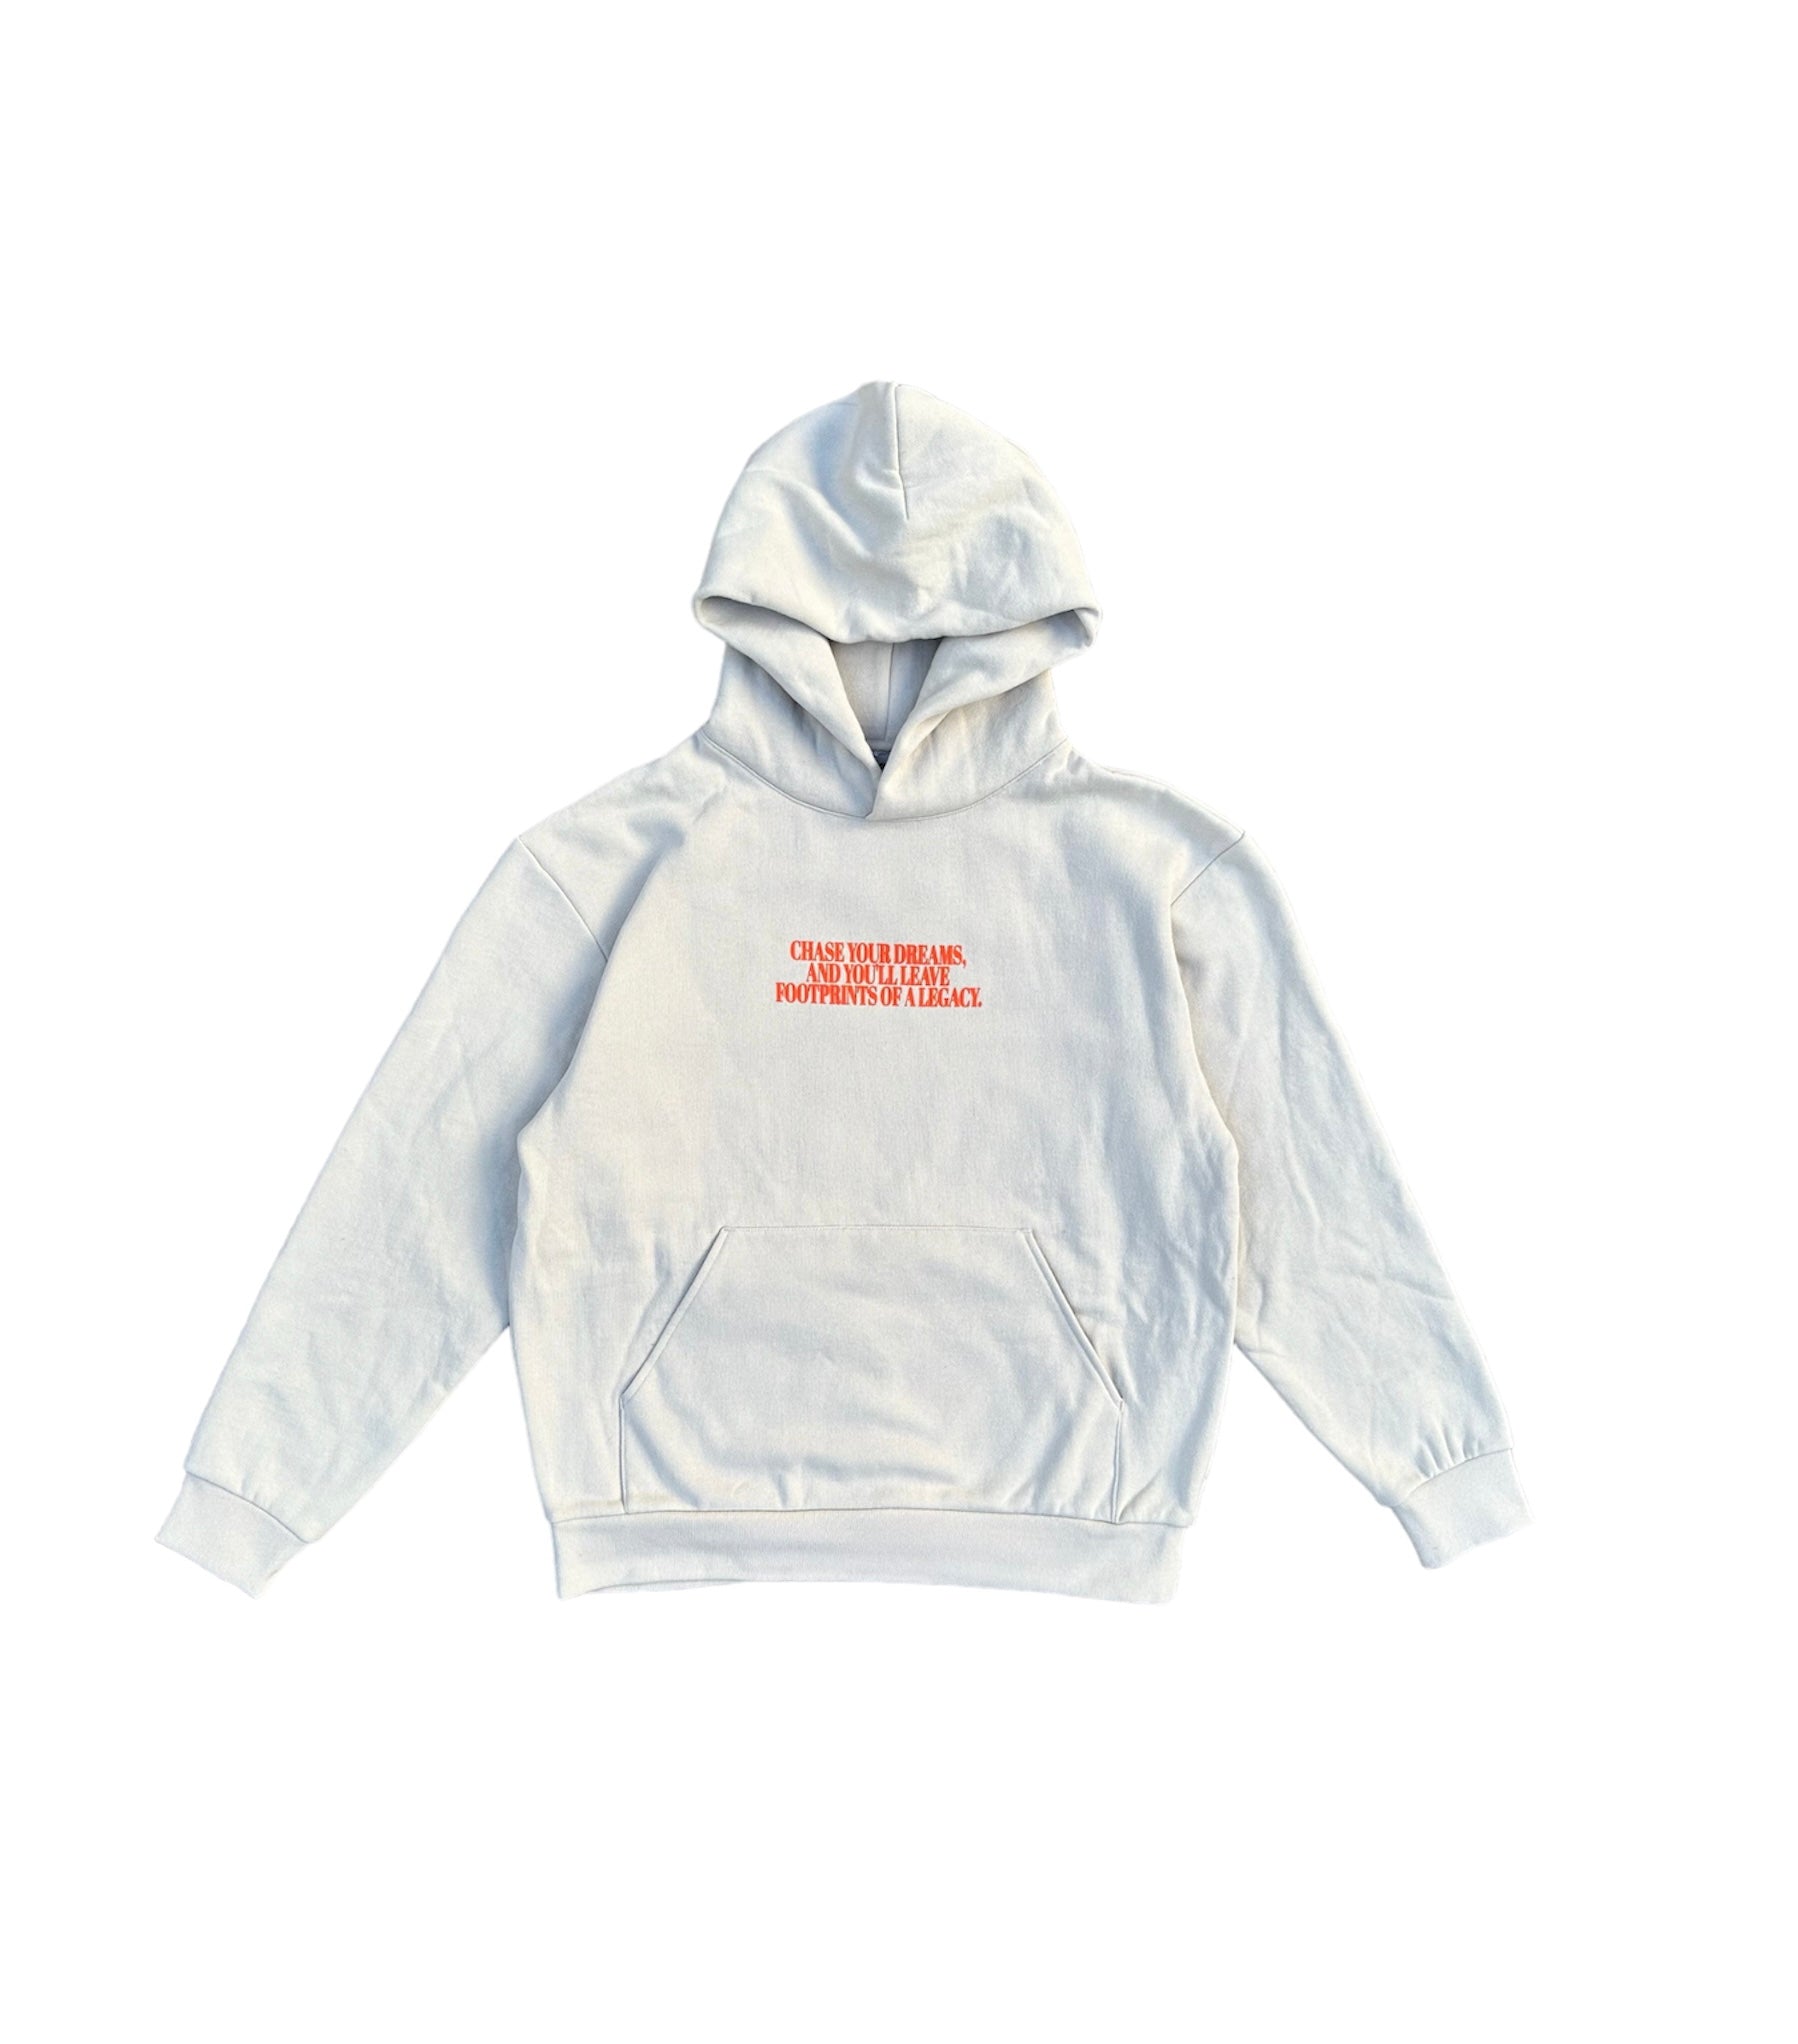 “Chasing Legacy” Hoodie (Off-White)